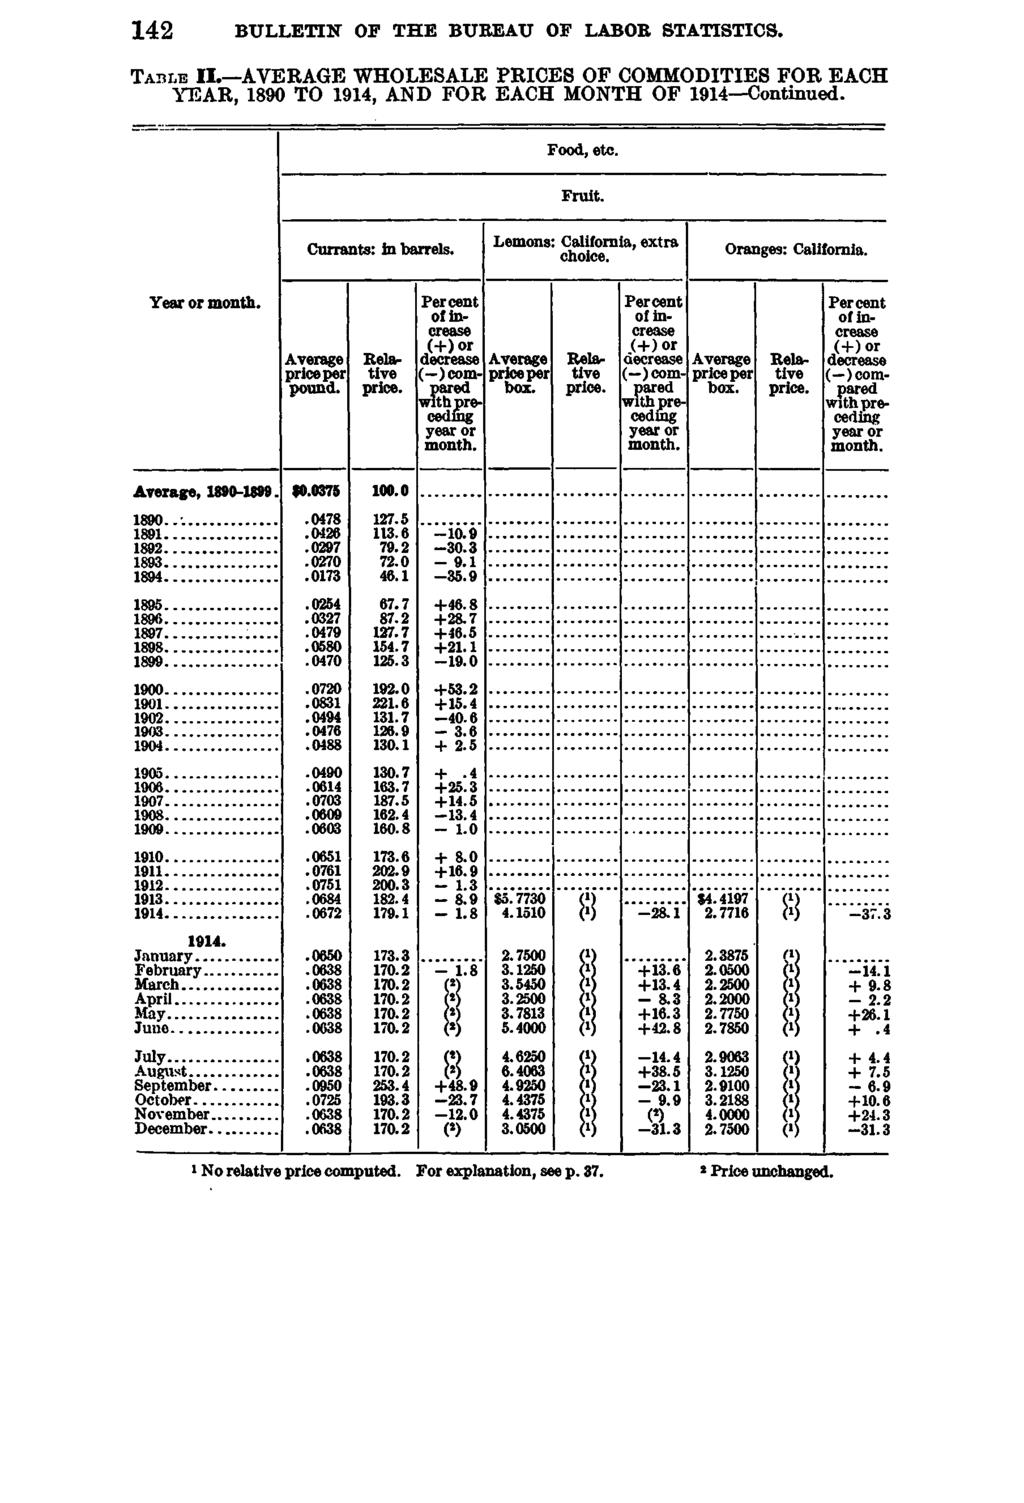 142 BULLETIN OF THE BUBEAU OF LABOB STATISTICS. T a b le IL AVERAGE WHOLESALE PRICES OF COMMODITIES FOR EACH YEAR, 1890 TO 1914, AND FOR EACH MONTH OF 1914 Continued. Food, etc. Fruit.